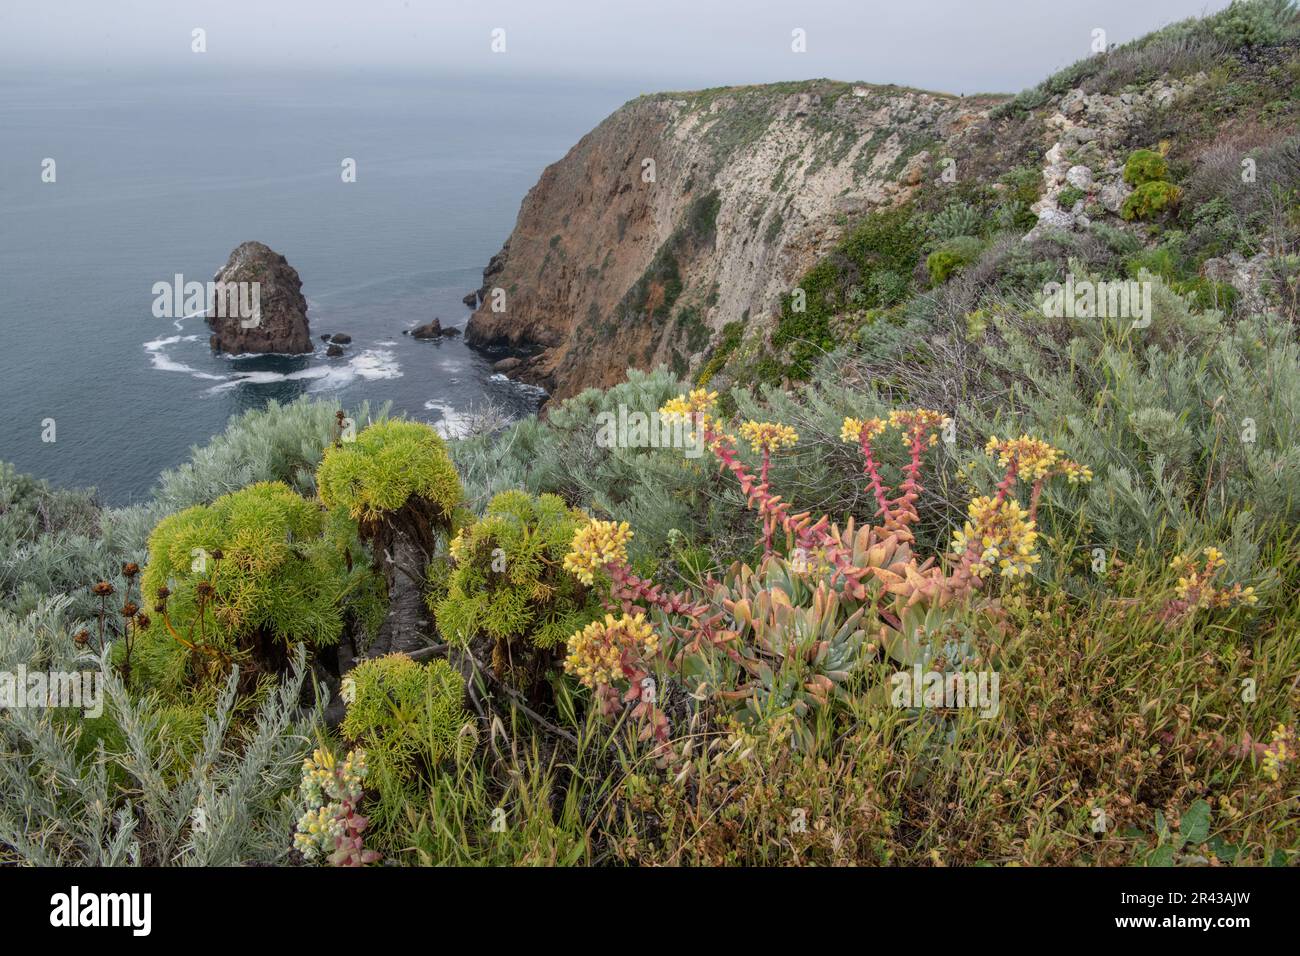 The coastal native plant community of the Channel islands, Dudleya greenei, Coreopsis gigantea, sagebrush, grow along the cliffs over the ocean. Stock Photo